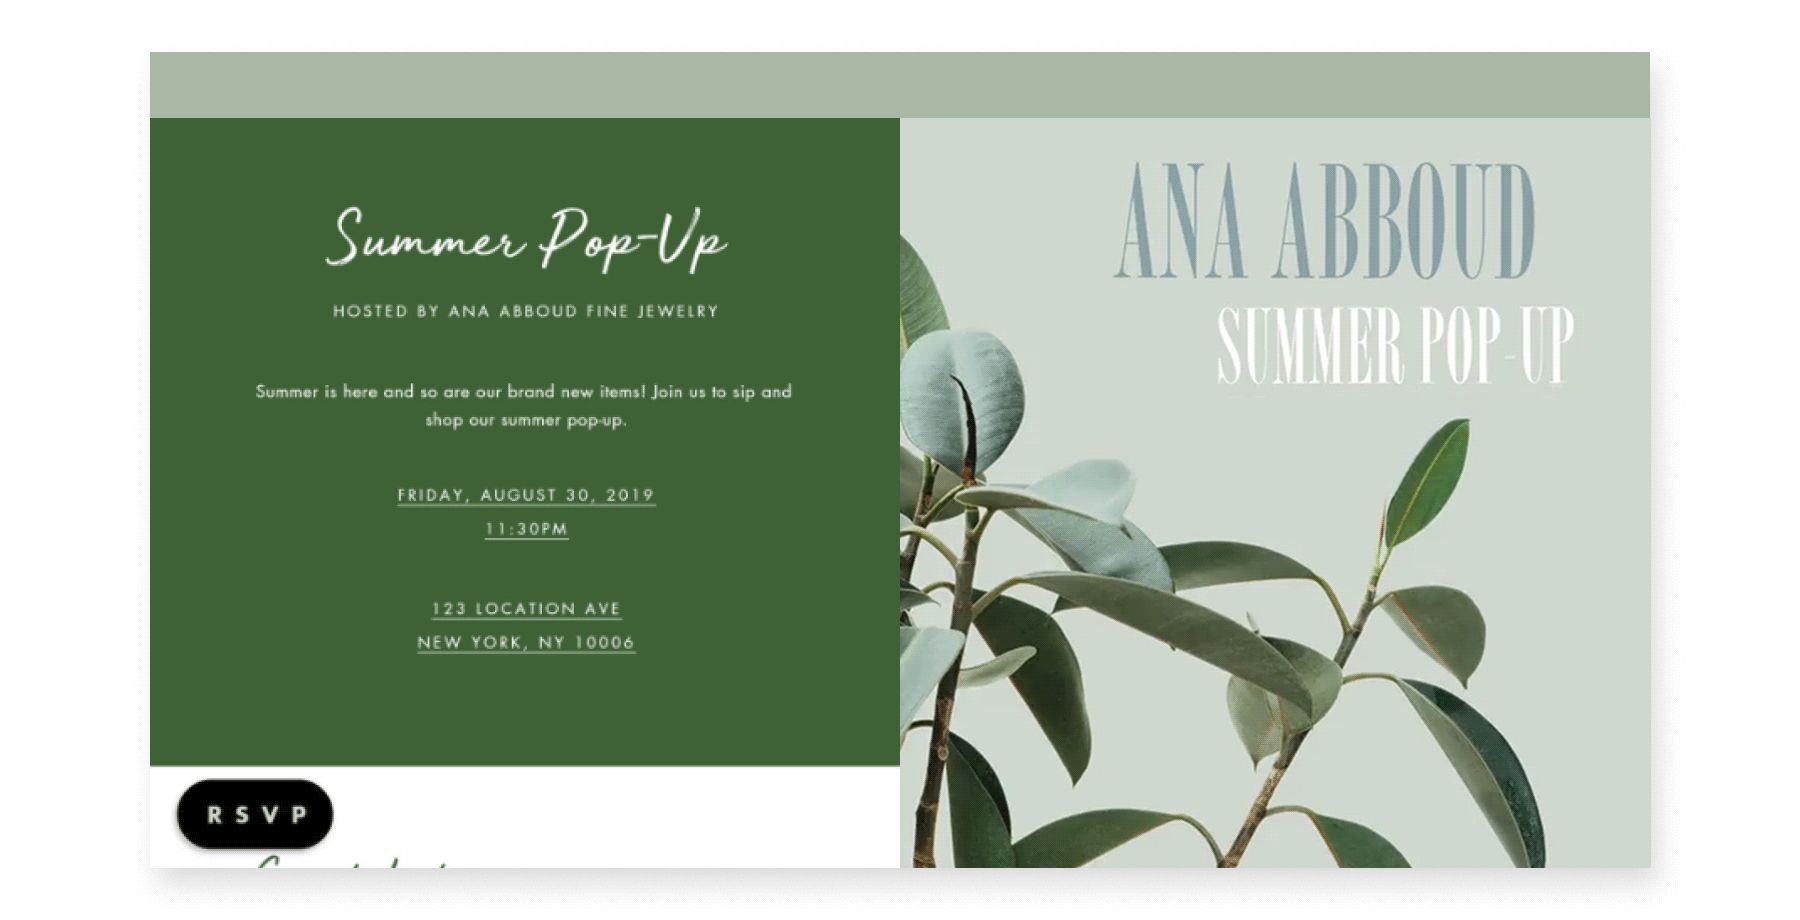 An online invite to “Ana Abboud Summer Pop-Up” is dark green on the left half and light green on the right with a photo of some plant sprigs.